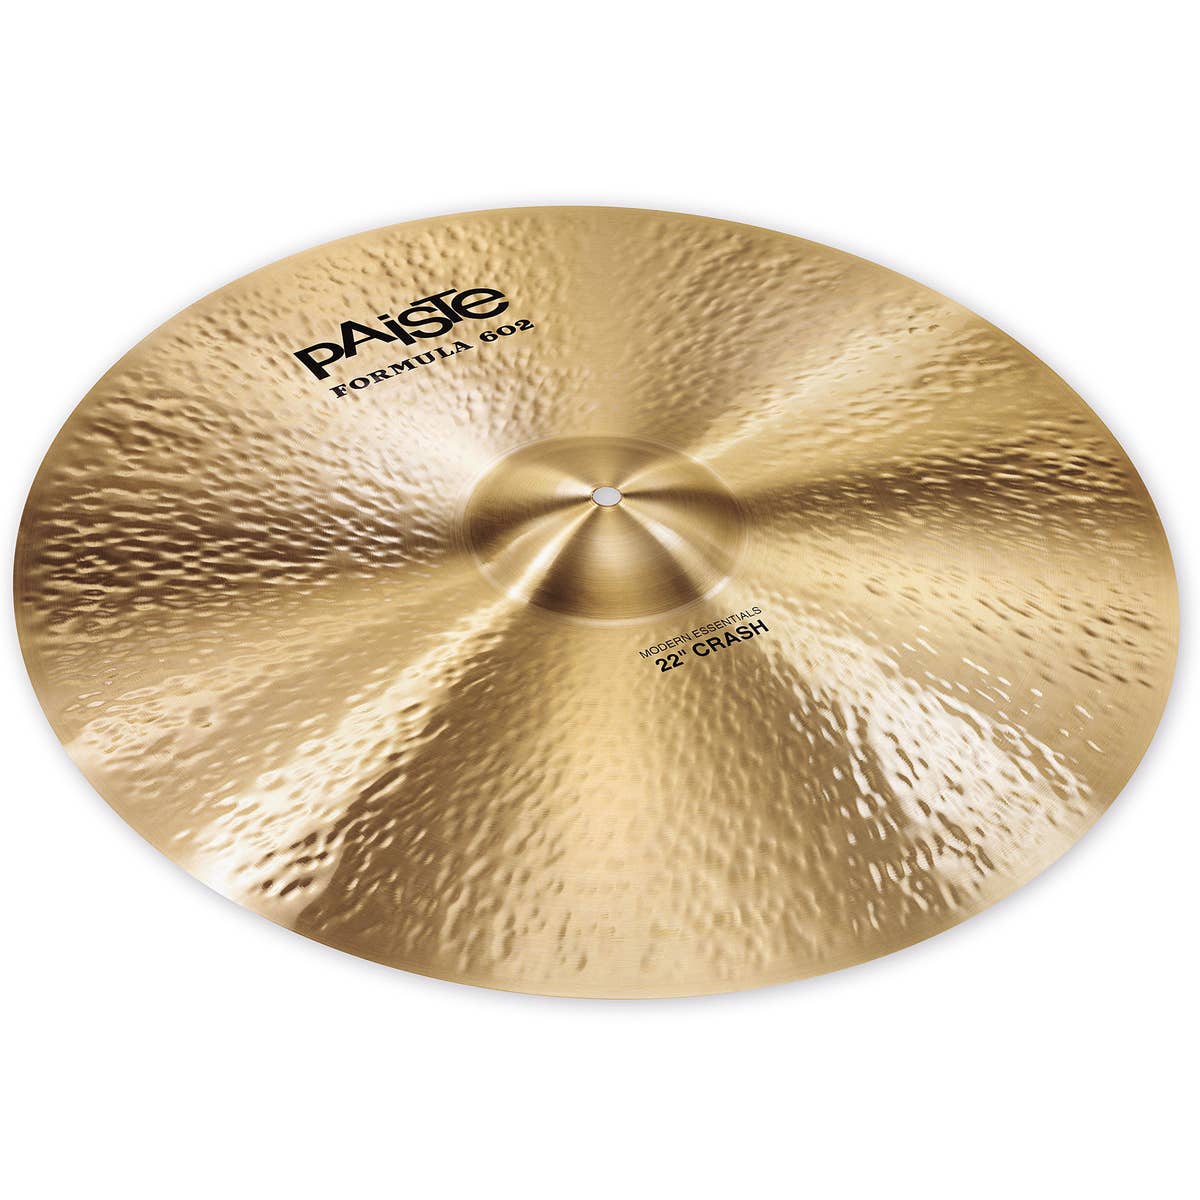 PAISTE Formula 602 Modern Essentials Crash Cymbal (Available in various sizes)